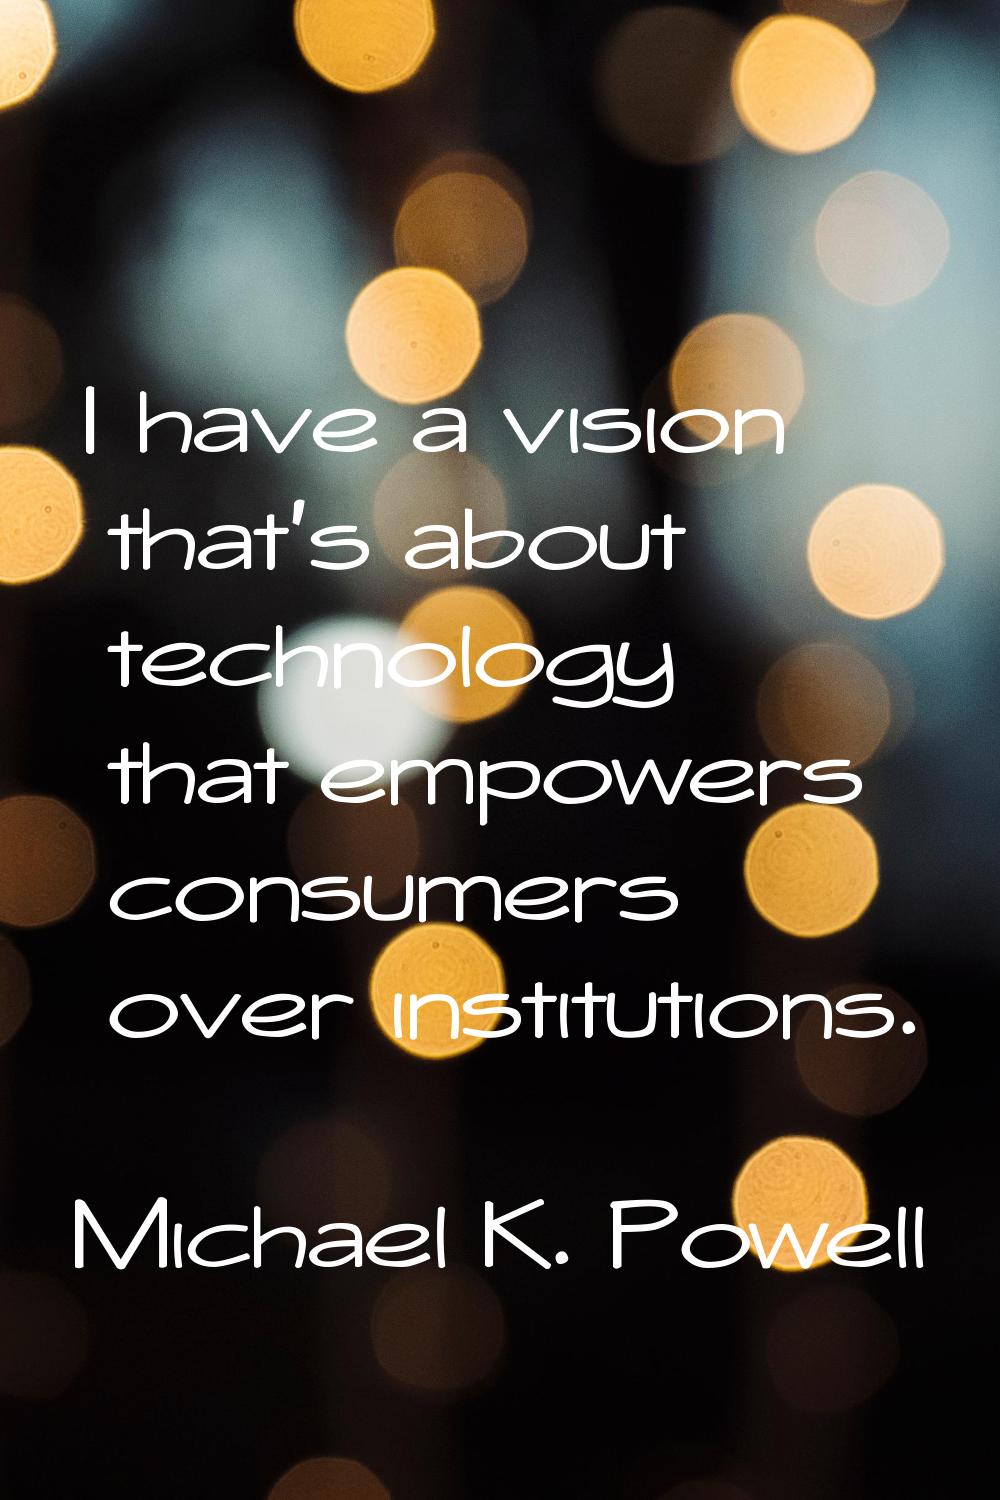 I have a vision that's about technology that empowers consumers over institutions.